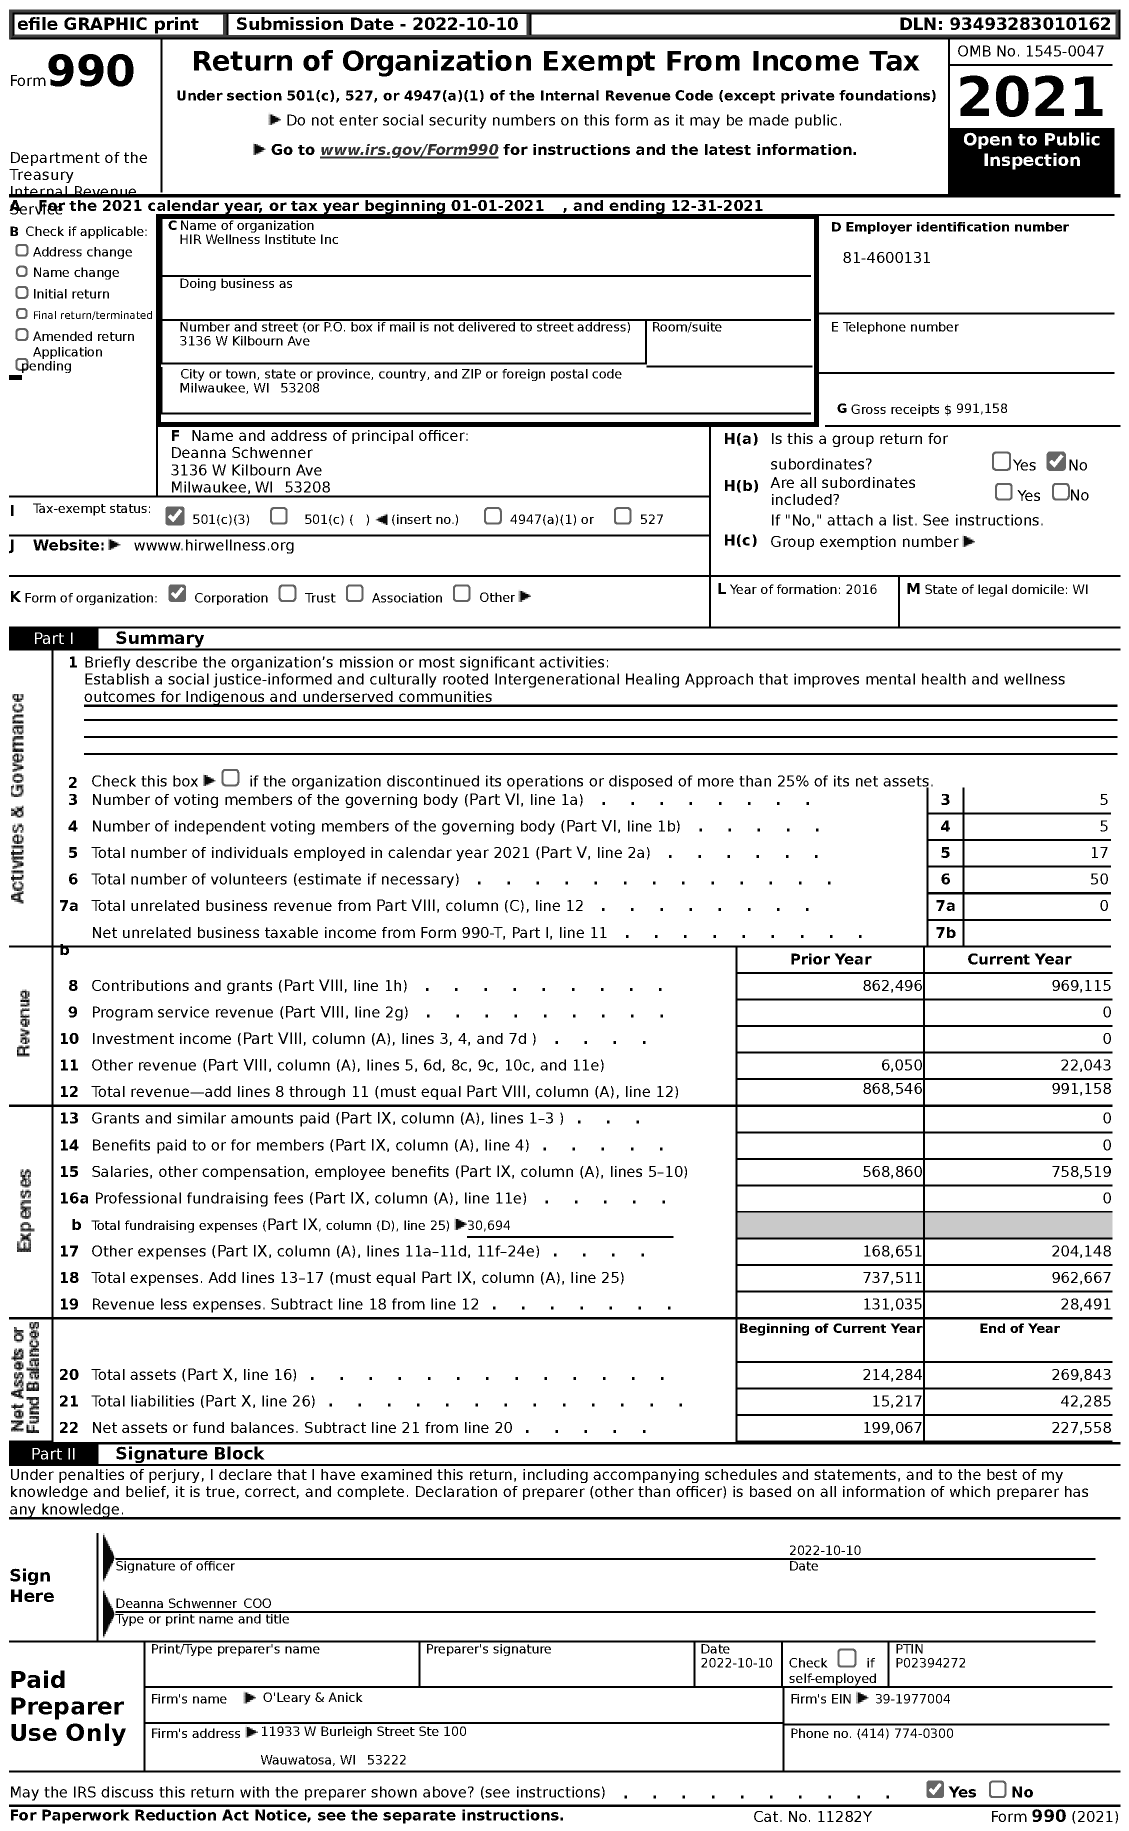 Image of first page of 2021 Form 990 for HIR Wellness Institute